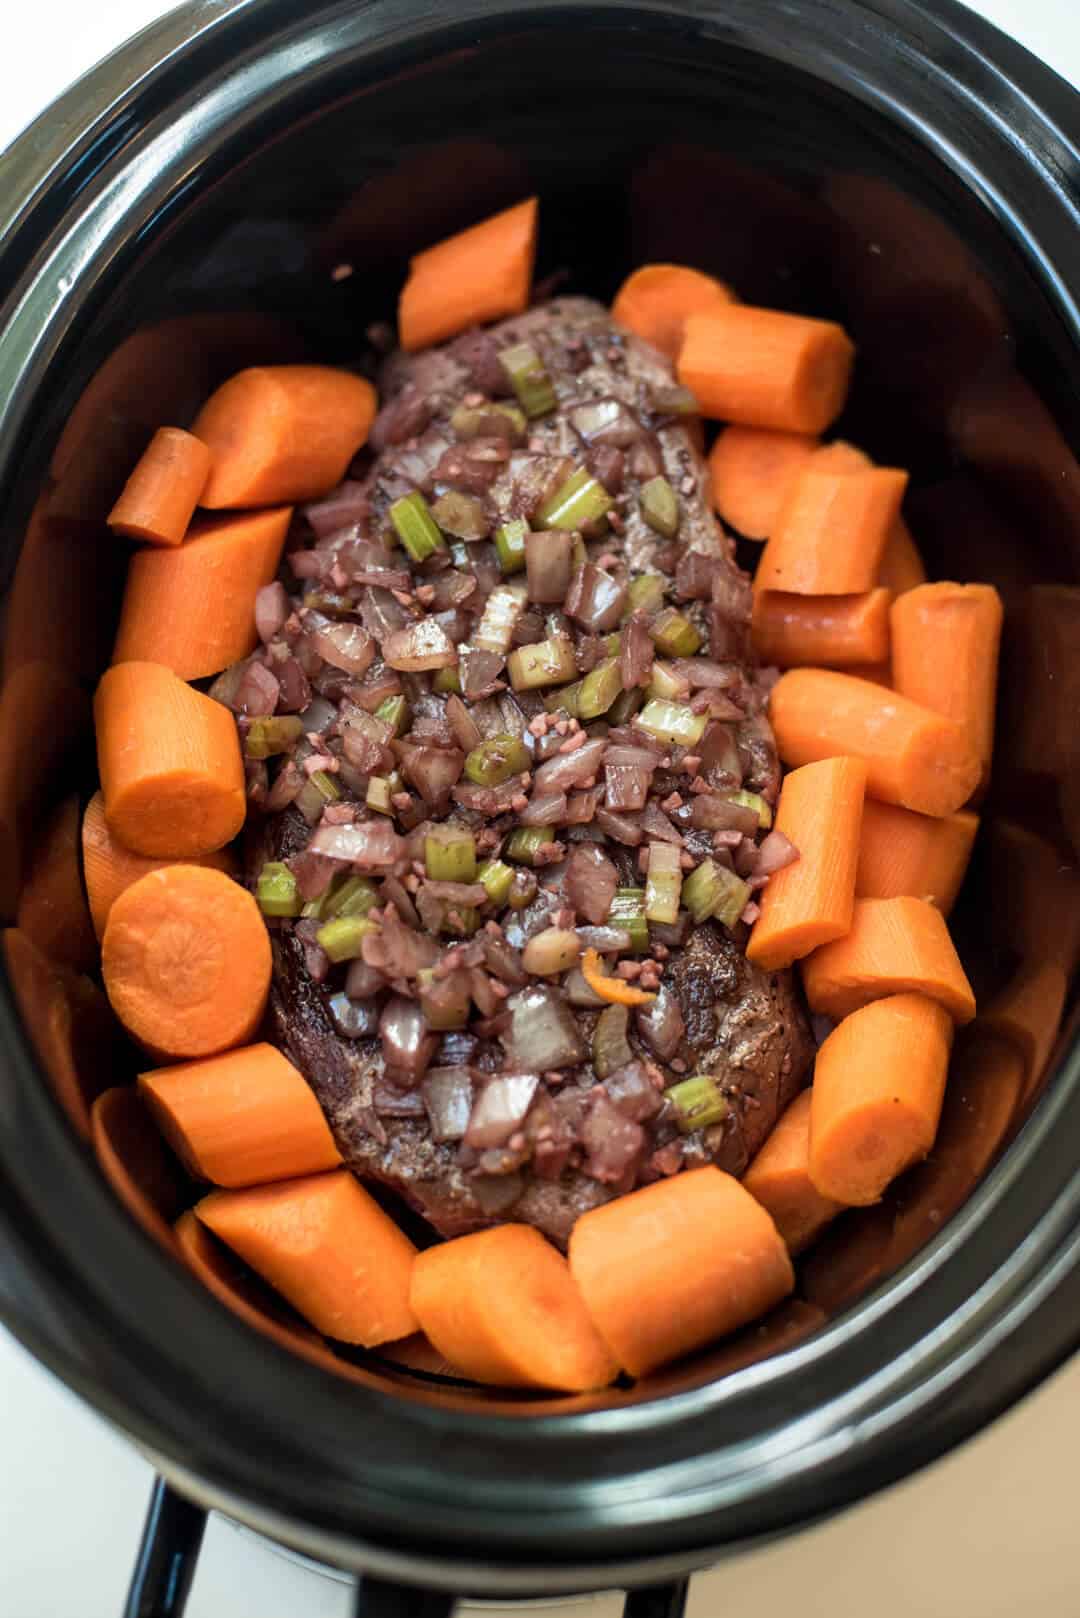 A pot roast in a slow cooker topped with an onion and celery mixture and big chunks of carrot.